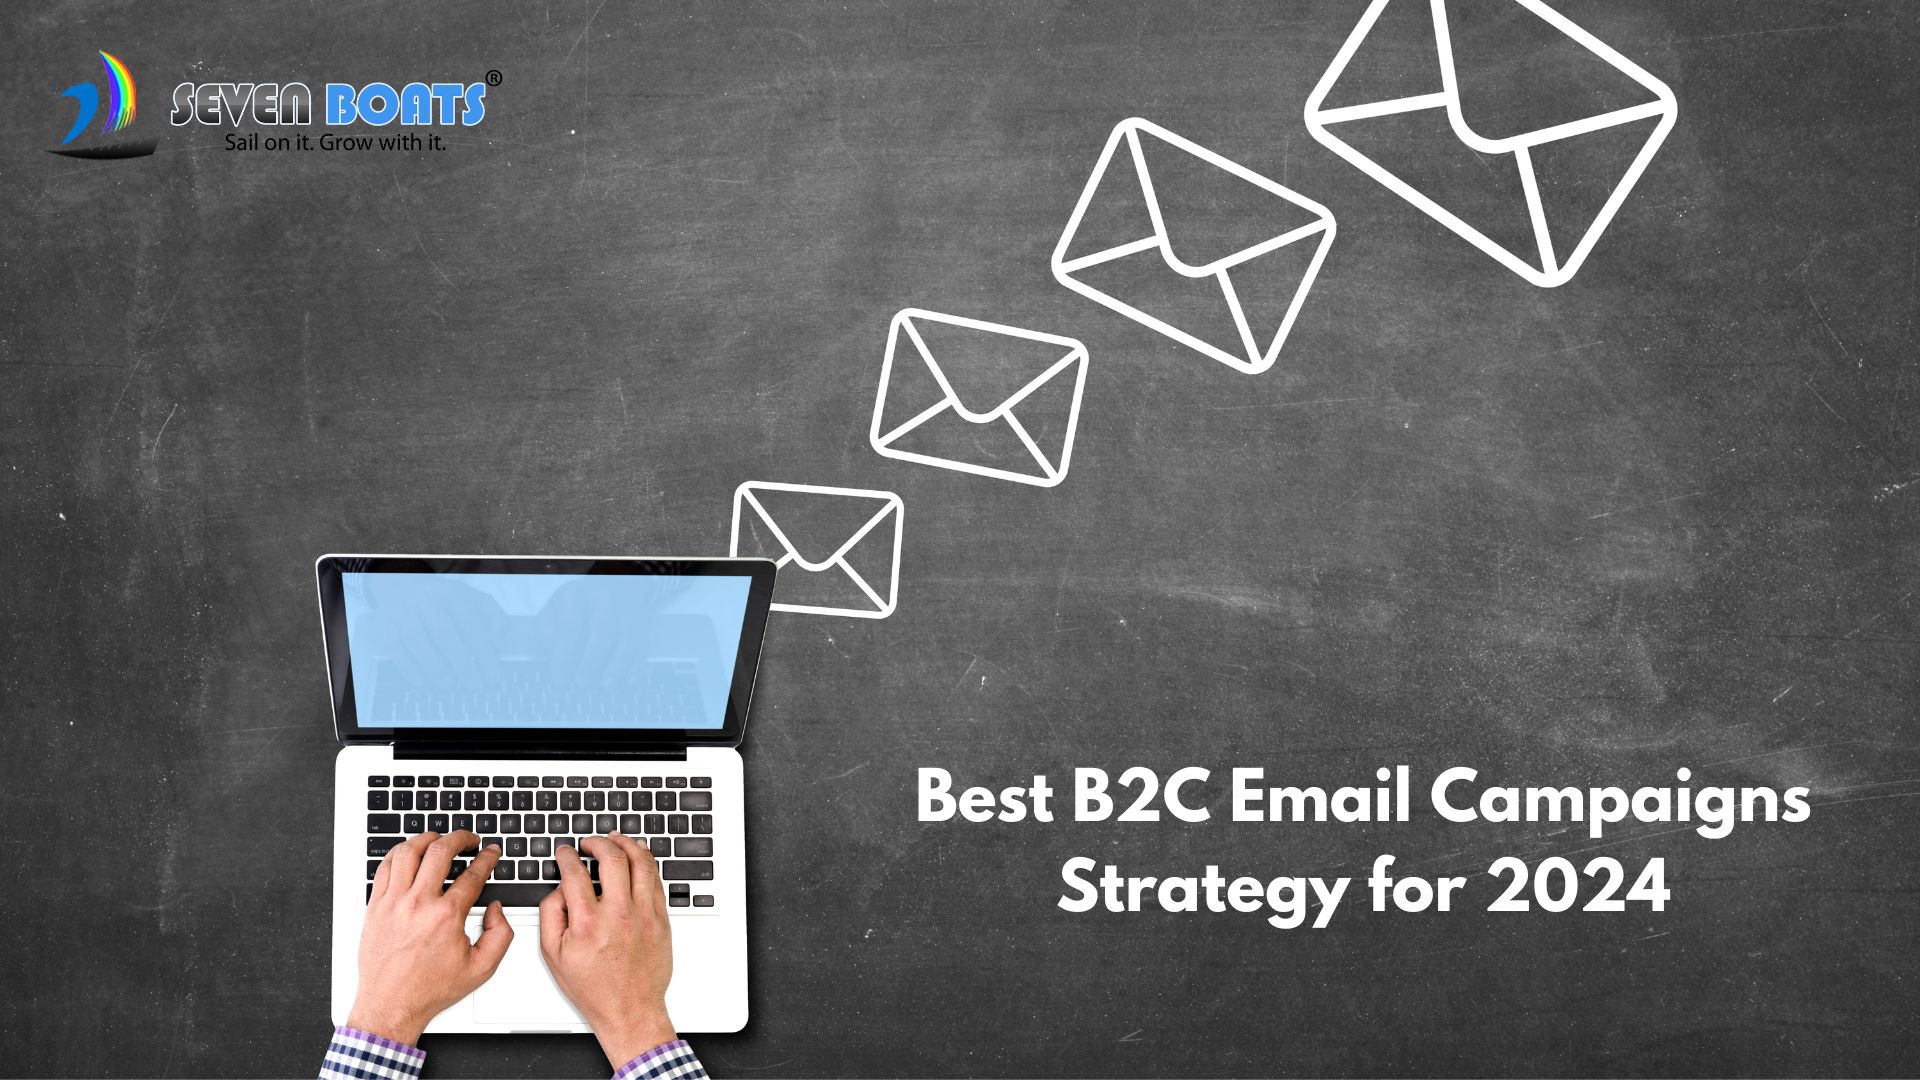 Best B2C Email Campaigns Strategy for 2024